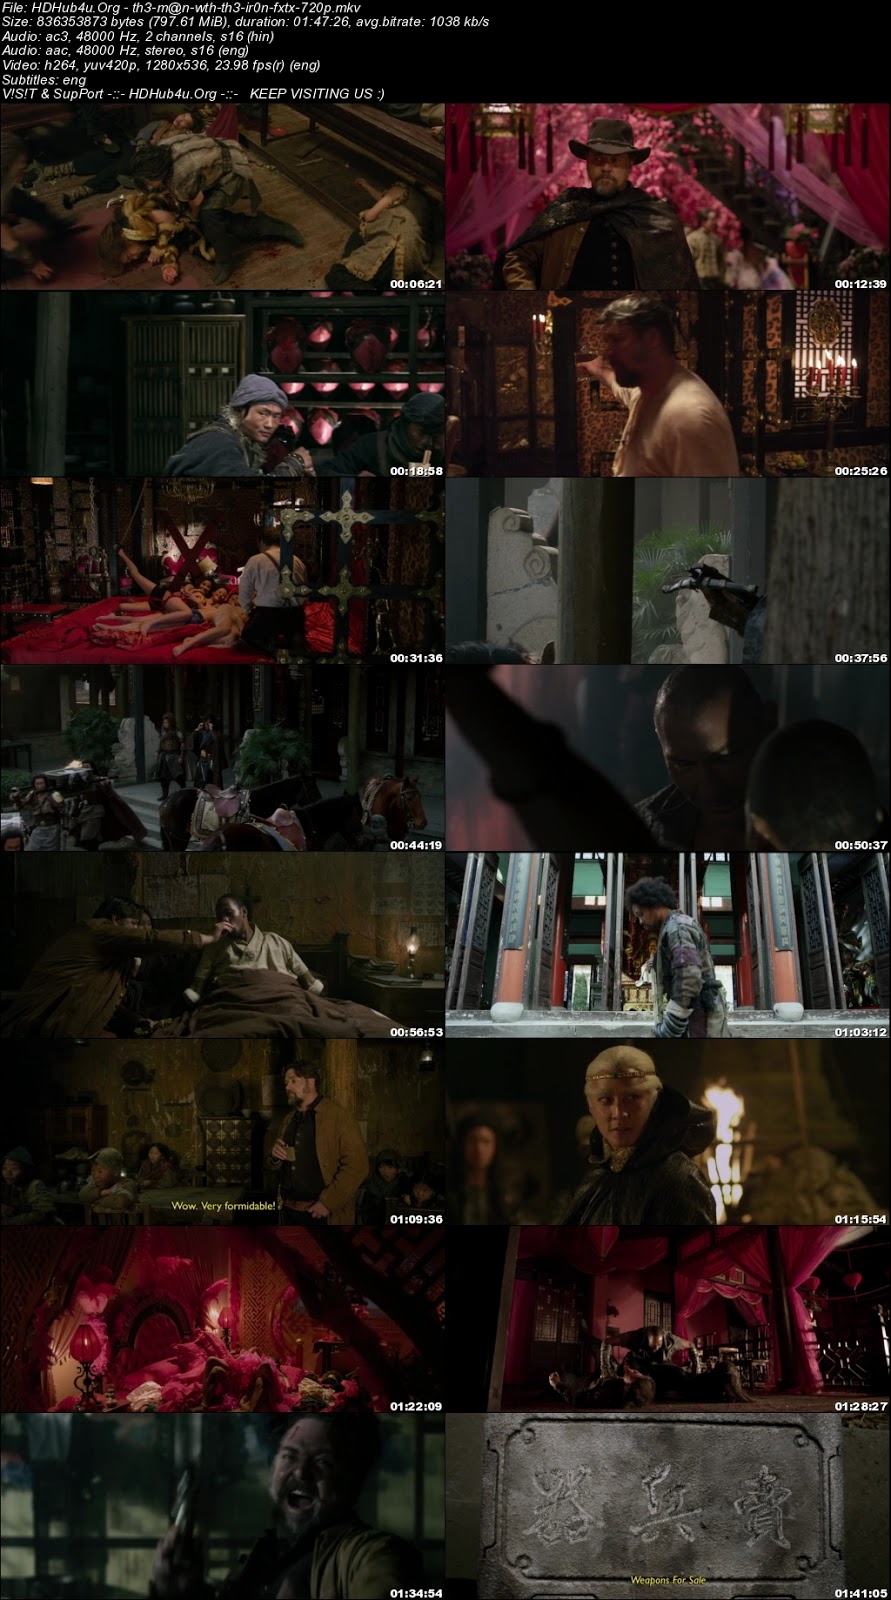 The Man with the Iron Fists 2012 Dual Audio Hindi 720p BluRay 800Mb Download